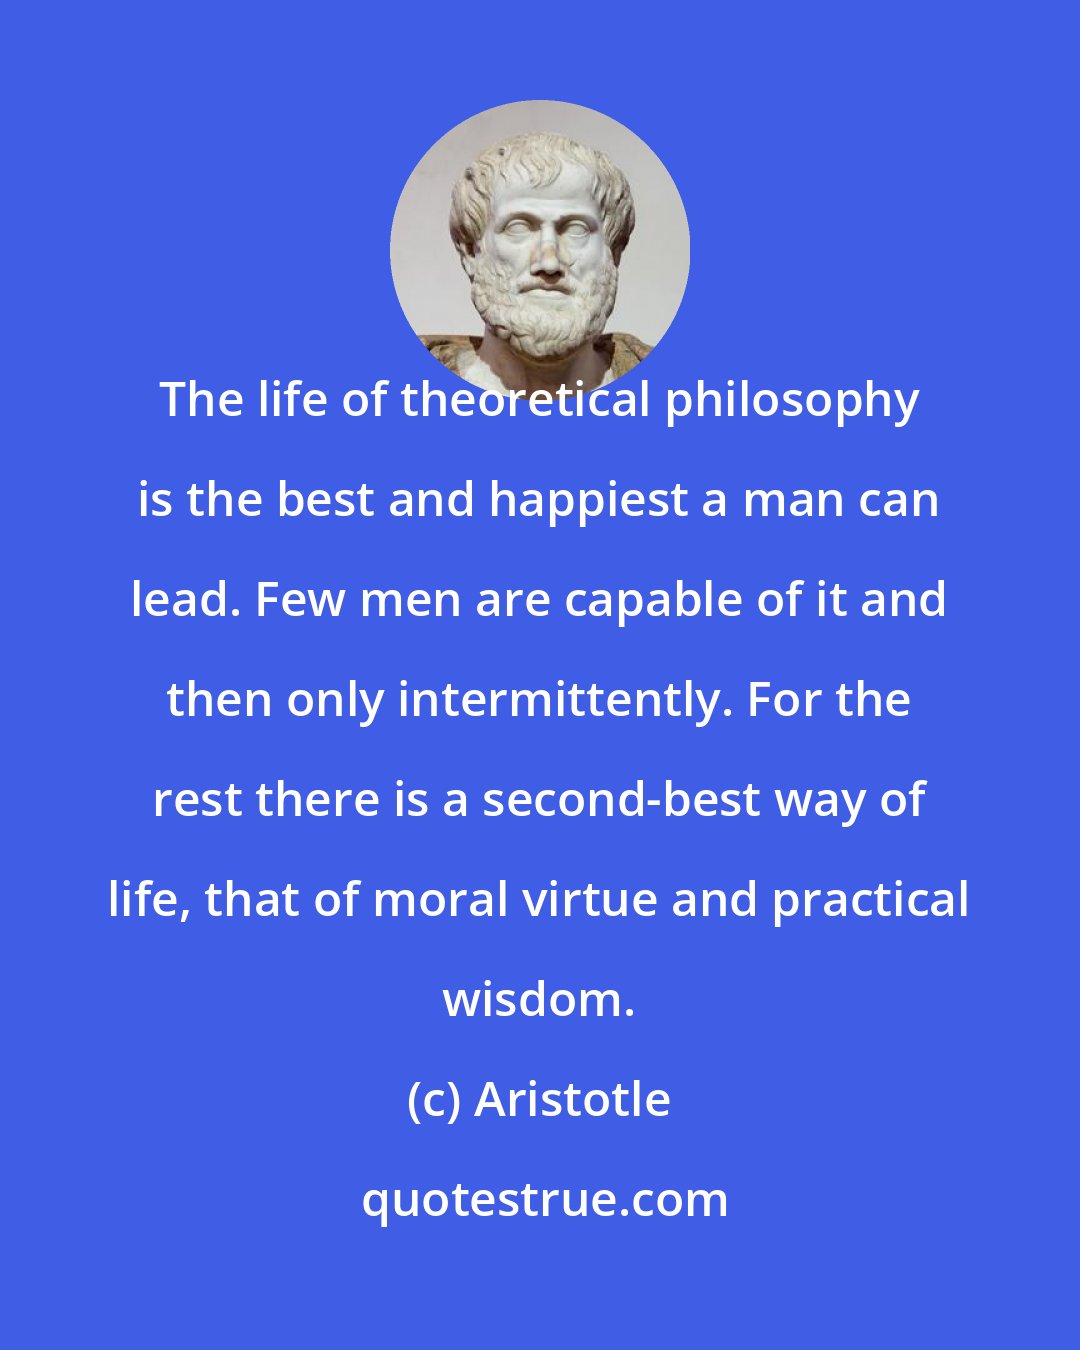 Aristotle: The life of theoretical philosophy is the best and happiest a man can lead. Few men are capable of it and then only intermittently. For the rest there is a second-best way of life, that of moral virtue and practical wisdom.